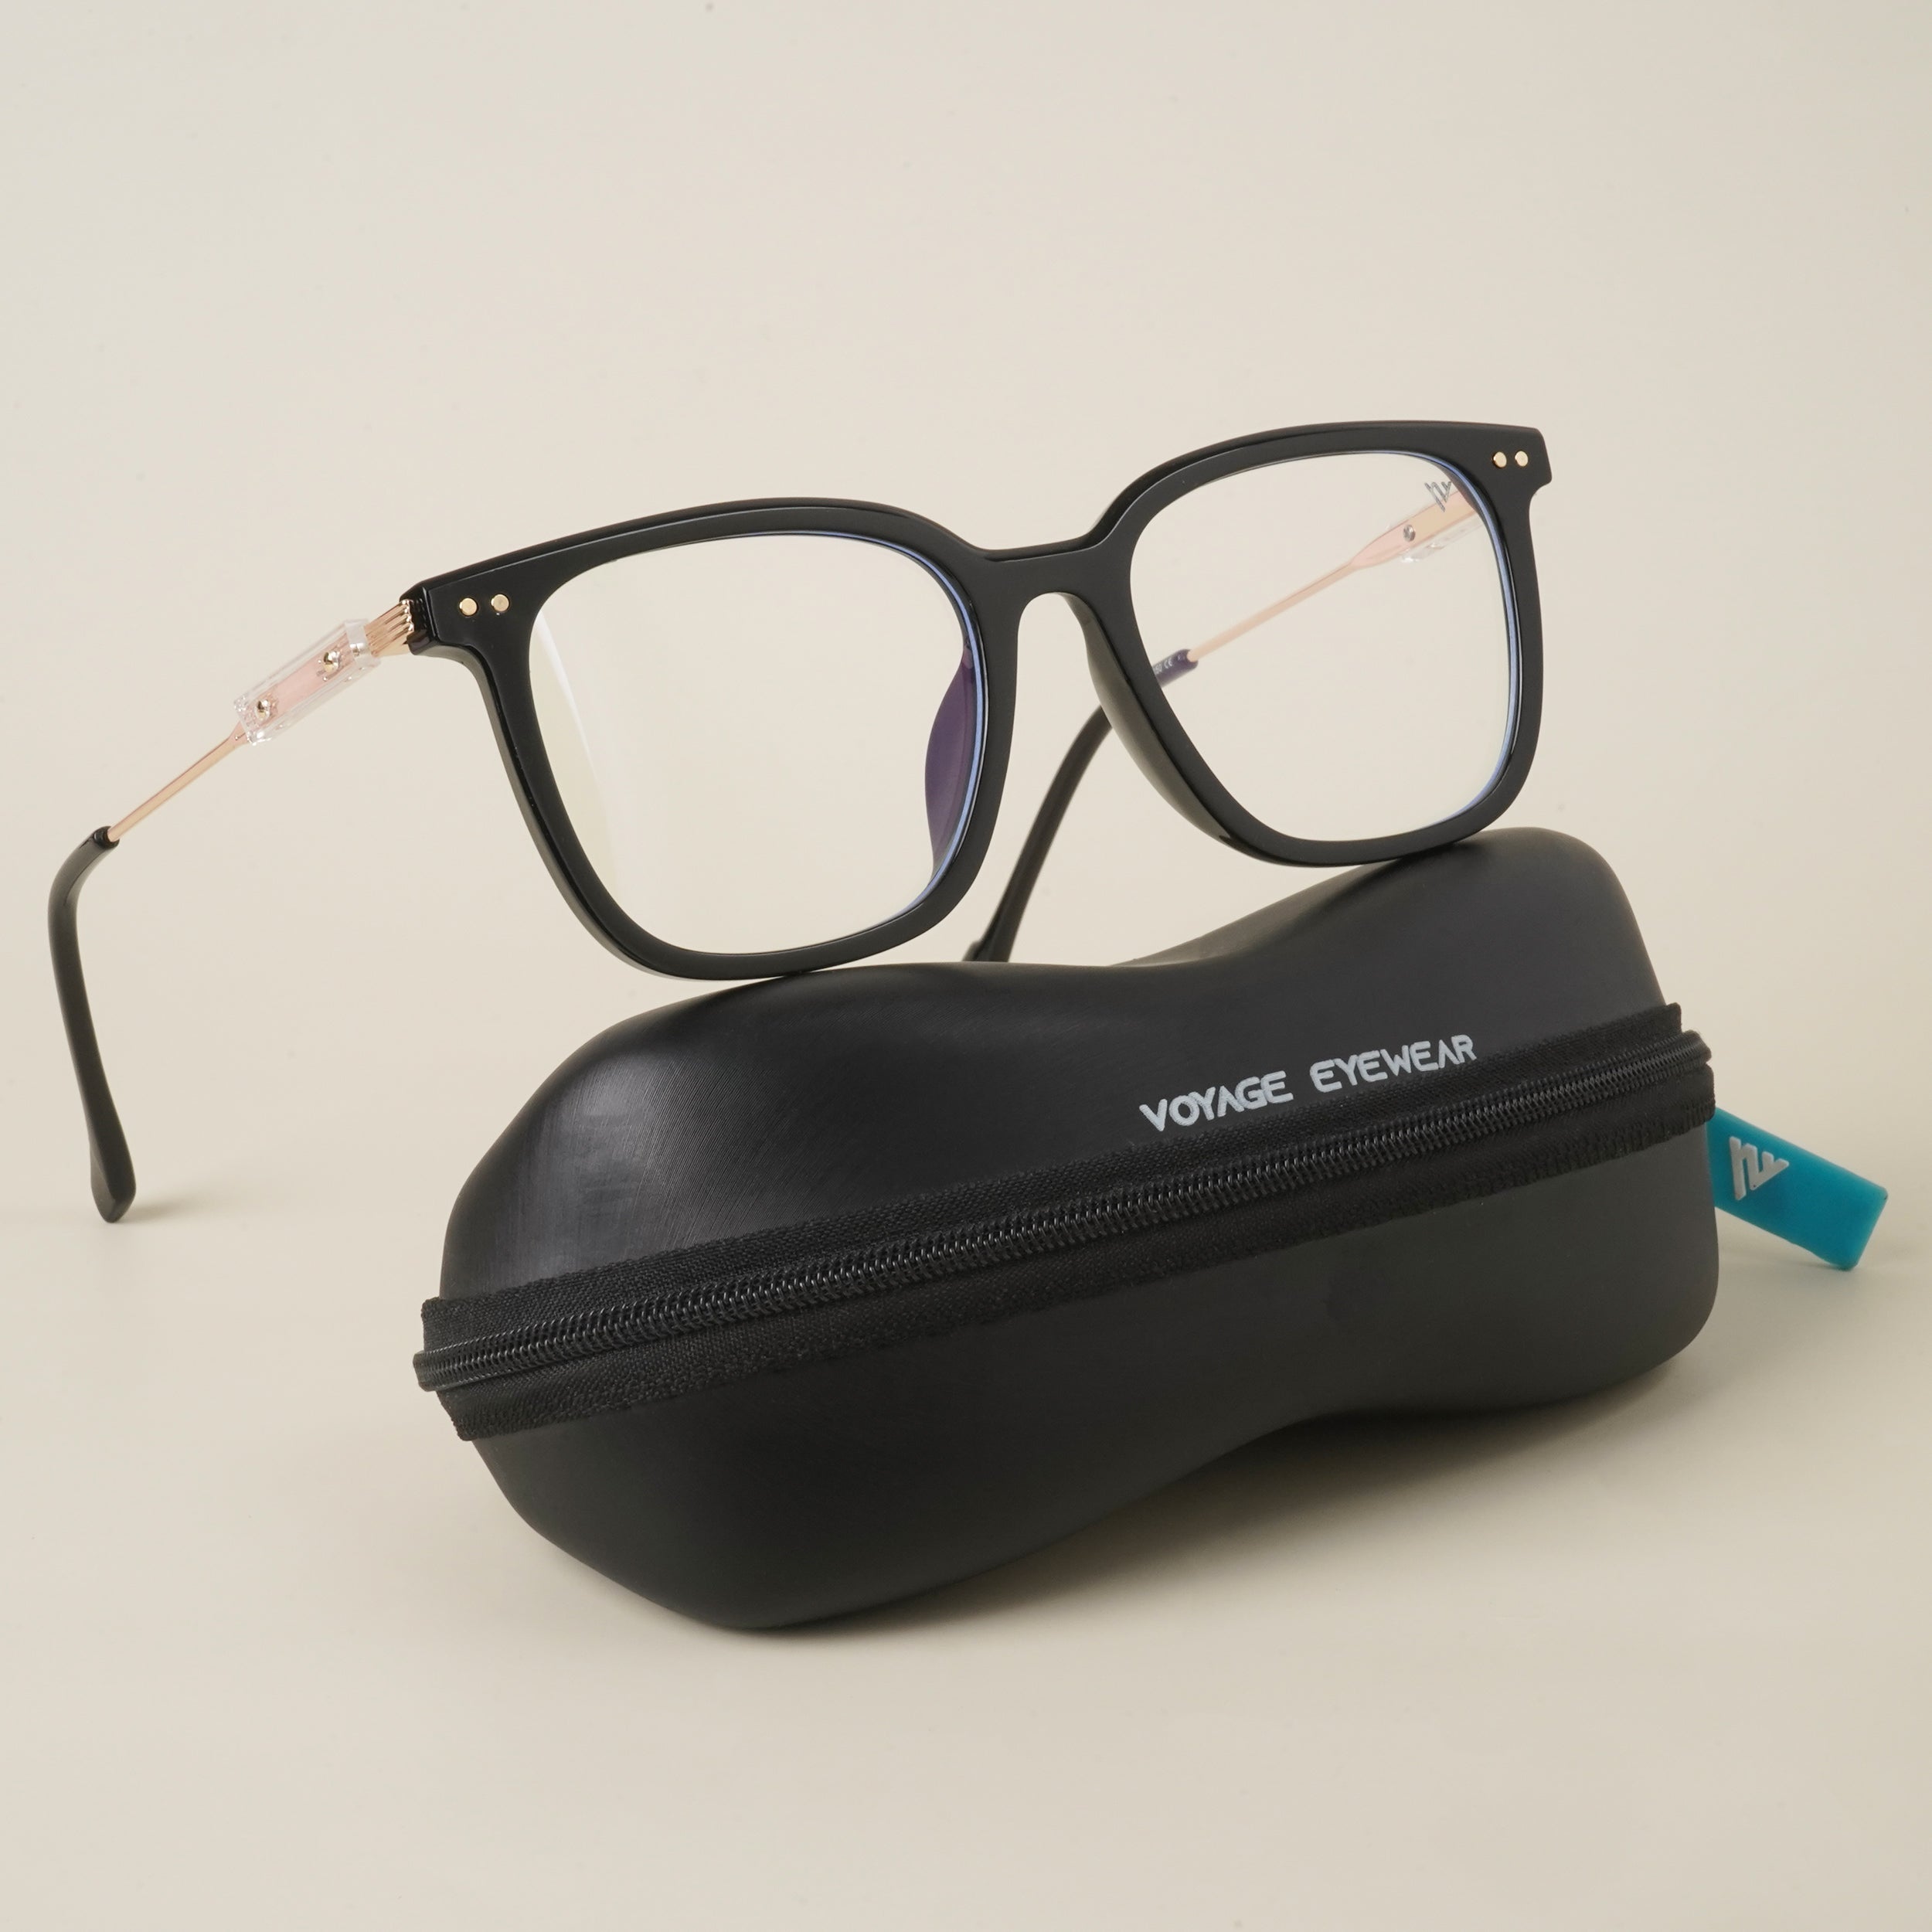 Voyage Black Square Eyeglasses With Golden Temple - MG3861